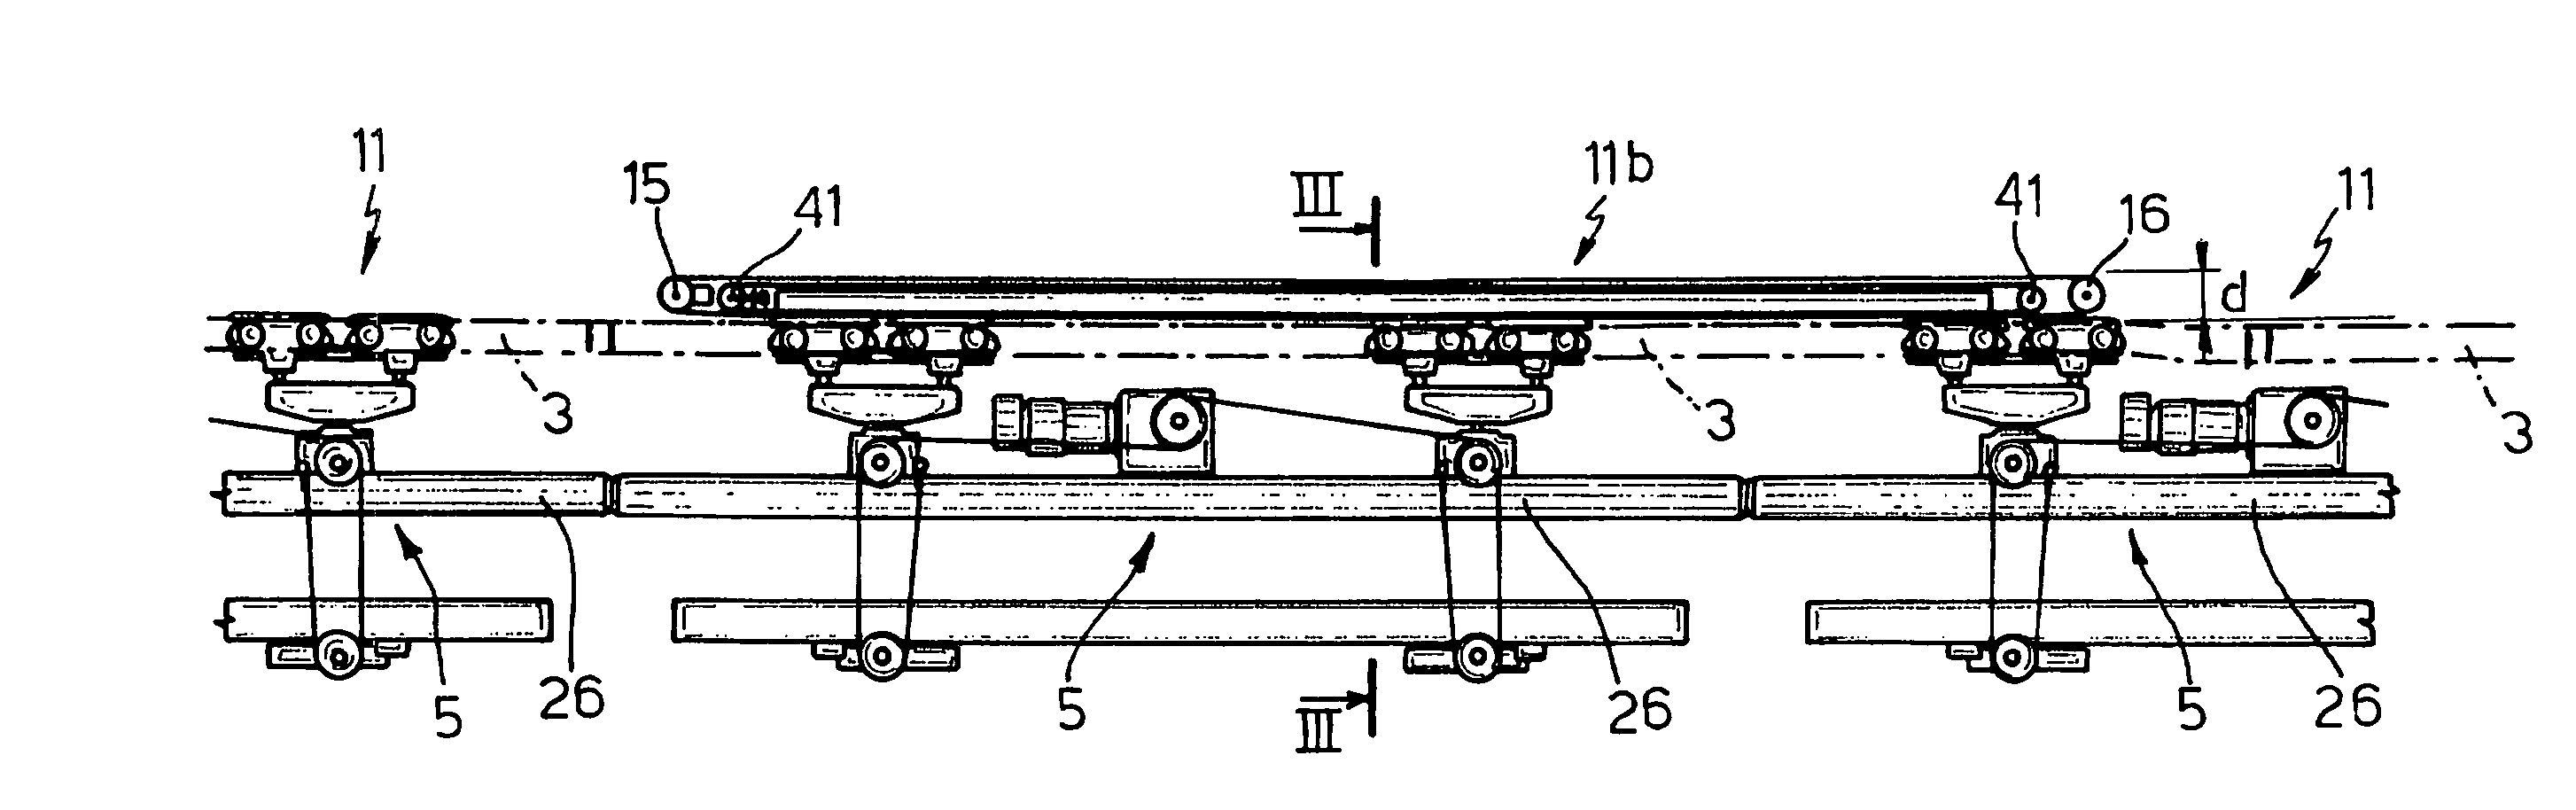 Integrated conveyor system for moving loads, in particular vehicles, along a production line